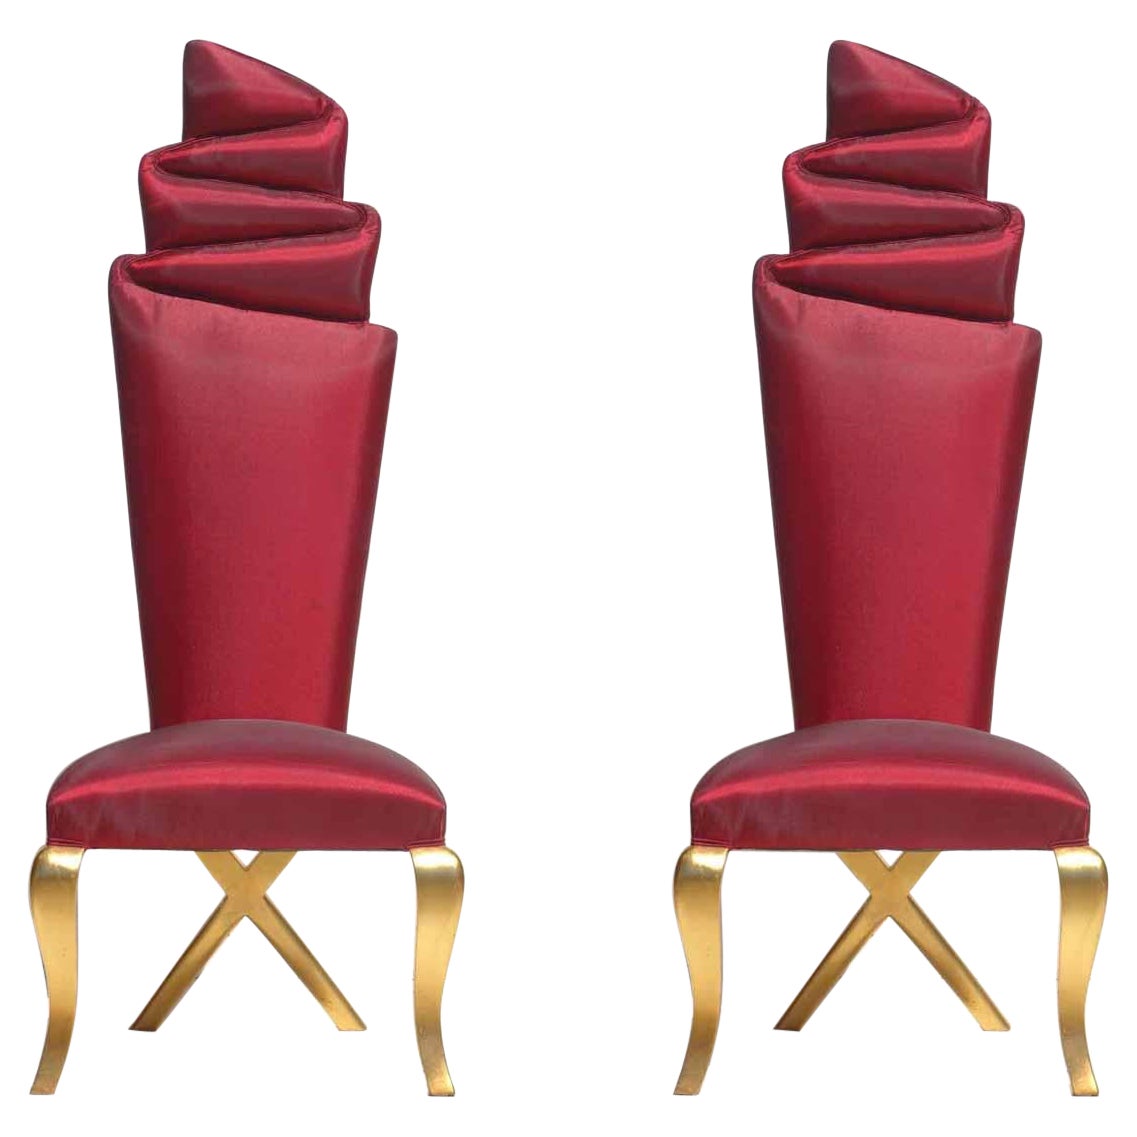 Surrealistic Modern Gold and Red Pair of Chairs For Sale